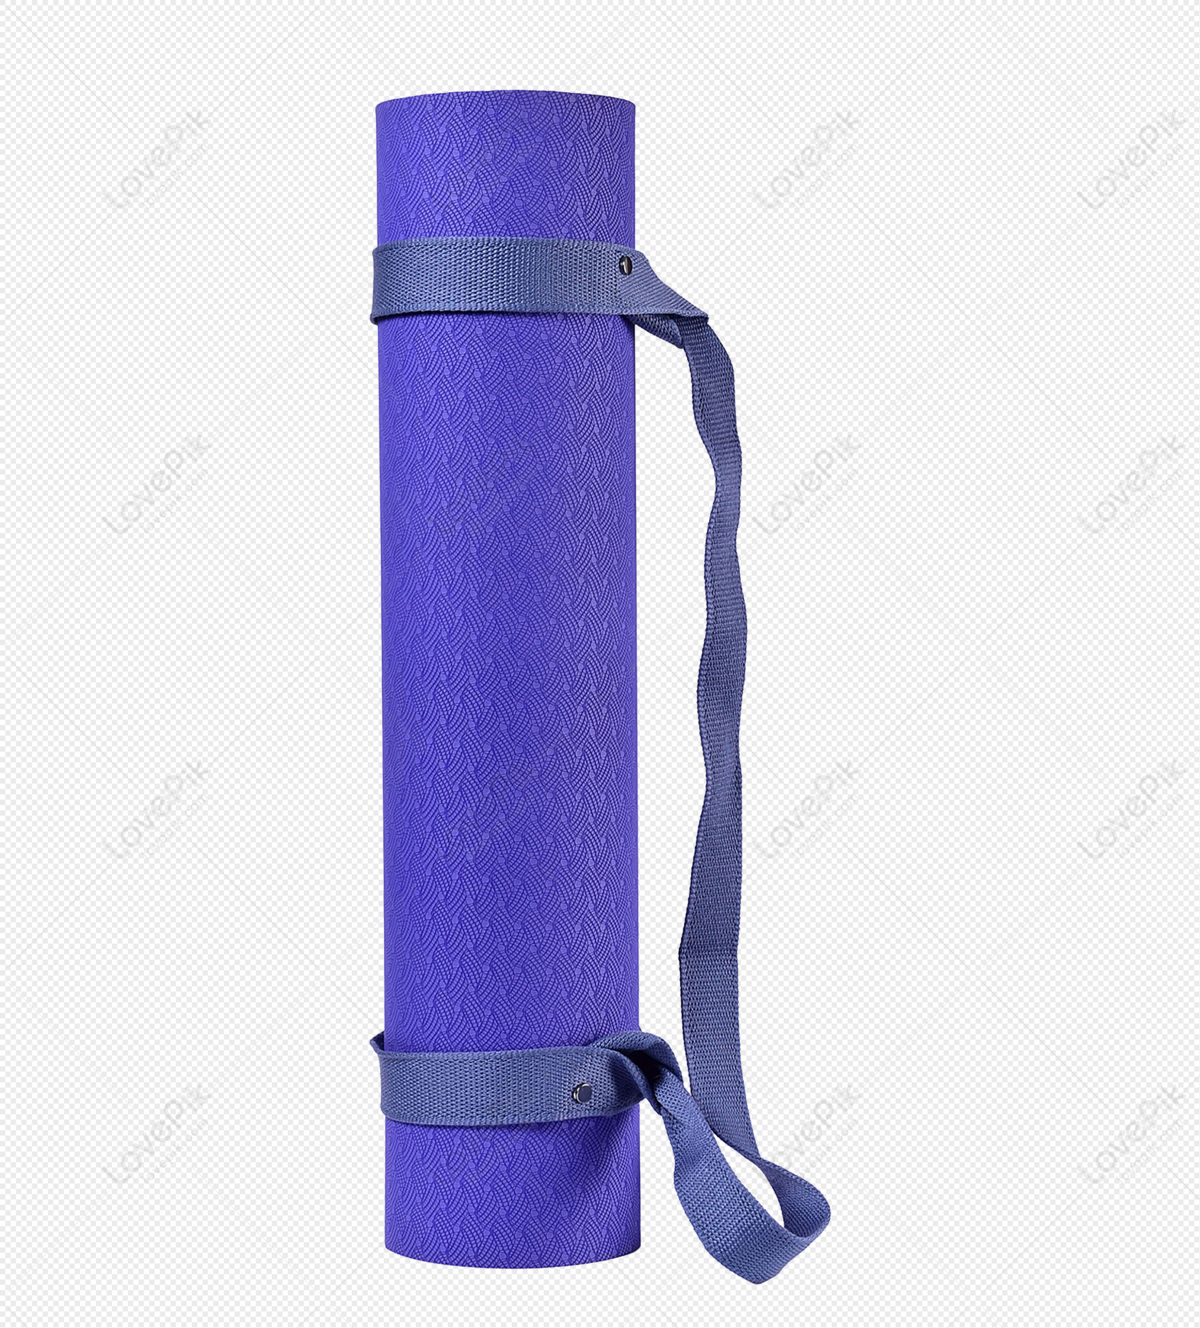 Yoga Mat Icon PNG Images With Transparent Background